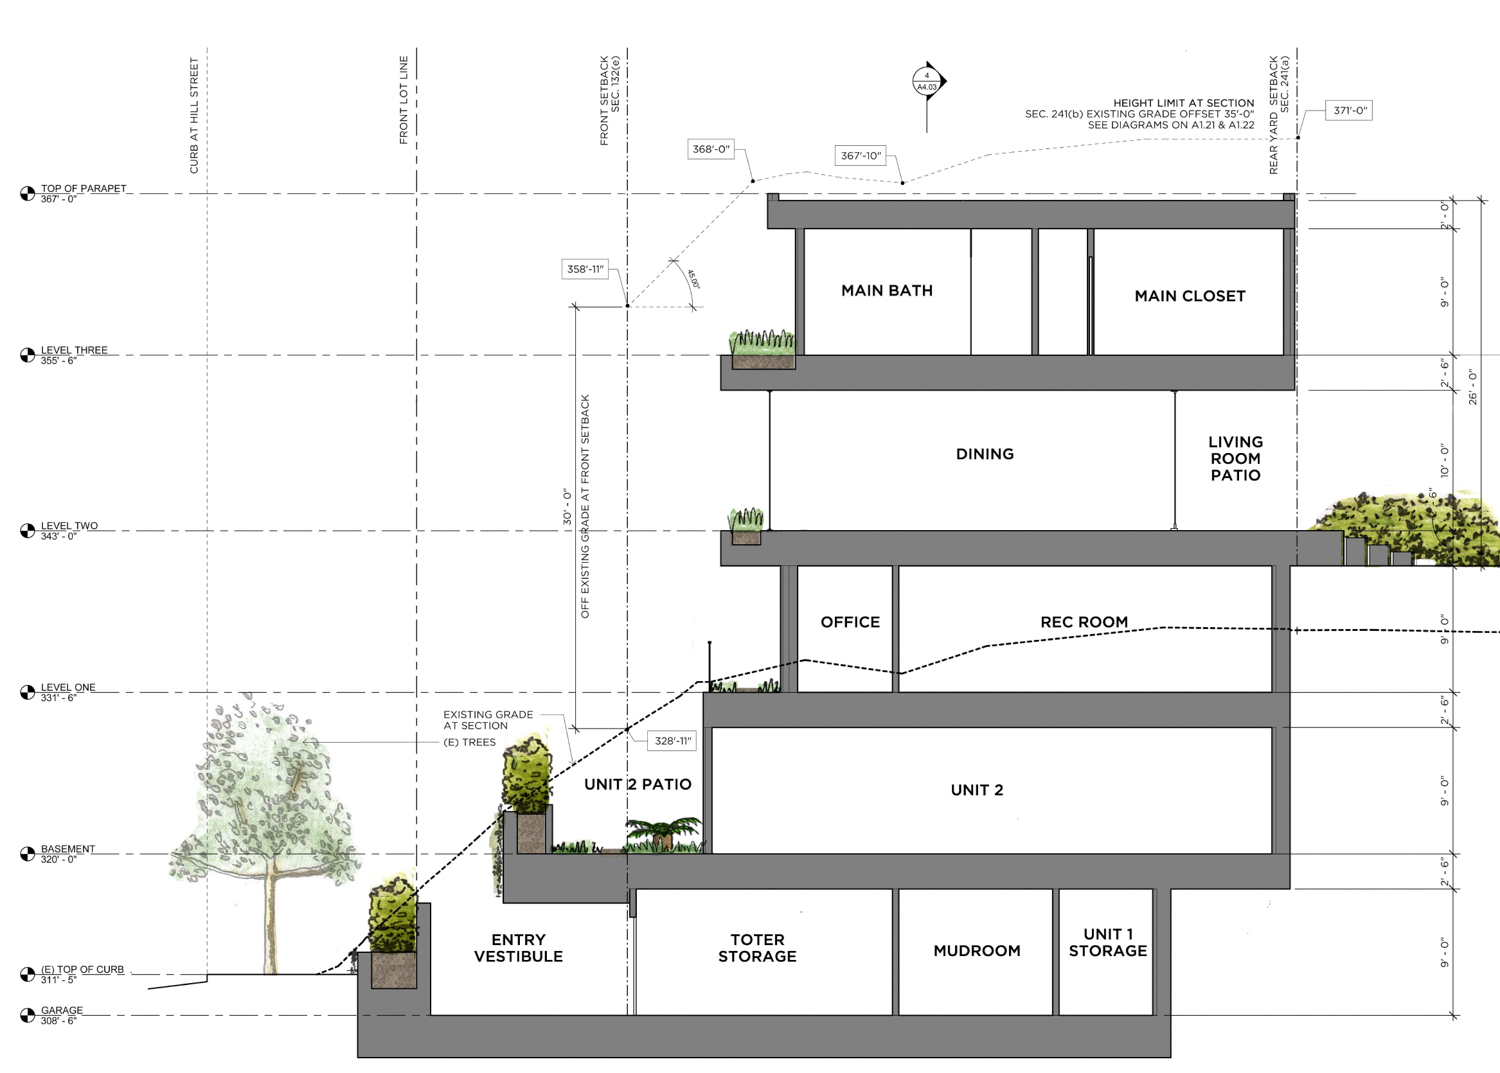 376 Hill Street vertical cross-section, rendering by Marmol Radziner Architect